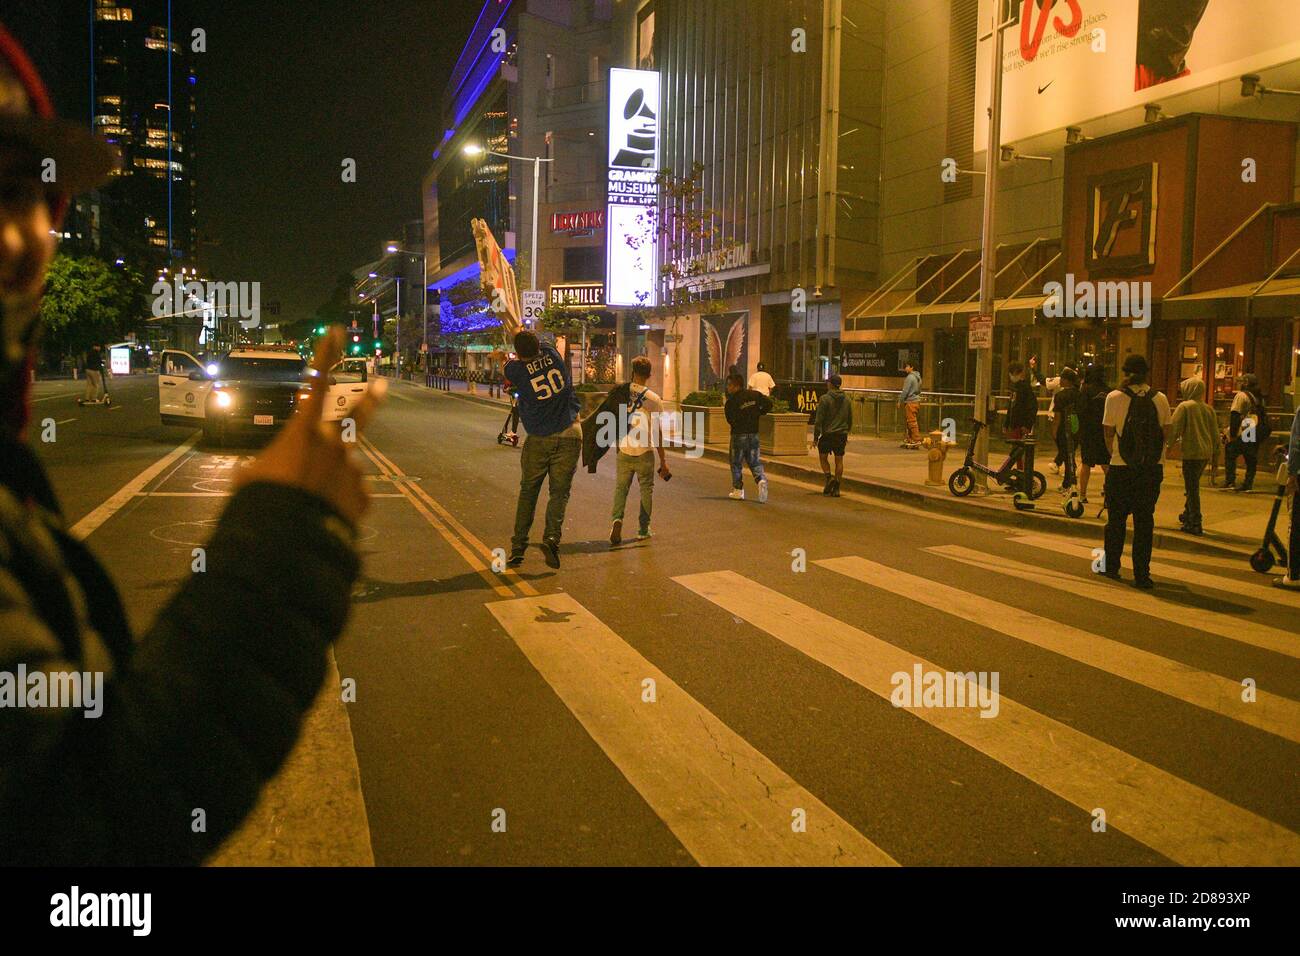 Los Angeles CA. 27th Oct, 2020. Fans celebrate Los Angeles Dodgers first World Series title in 32 years. Downtown Los Angeles, California on October 27, 2020. Credit: Dee Cee Carter/Media Punch/Alamy Live News Stock Photo